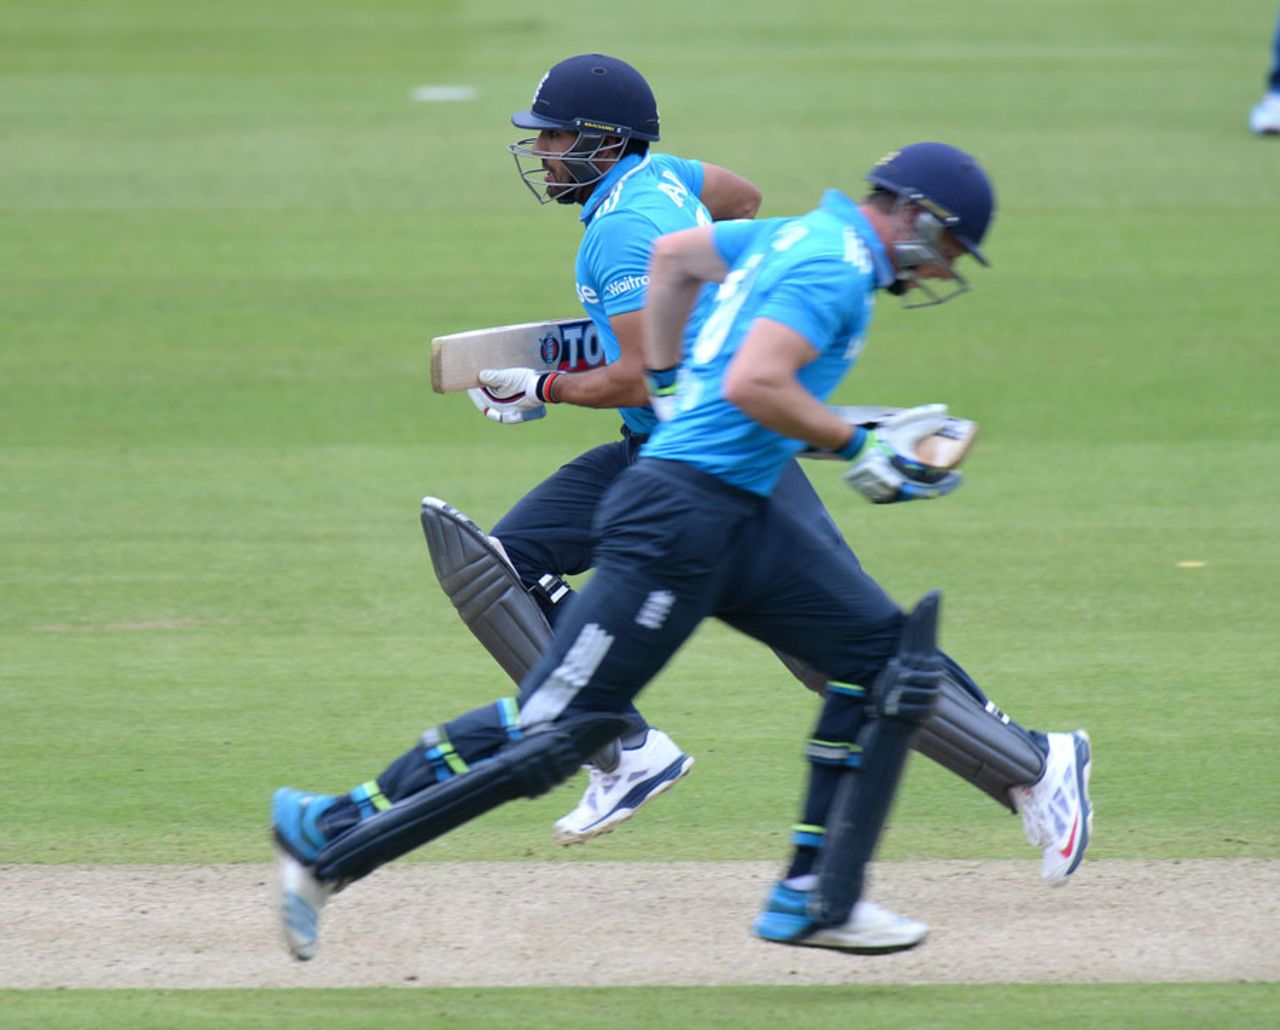 Jos Buttler and Ravi Bopara added 133 at 8.14 an over, England v Sri Lanka, 4th ODI, Lord's, May 31, 2014